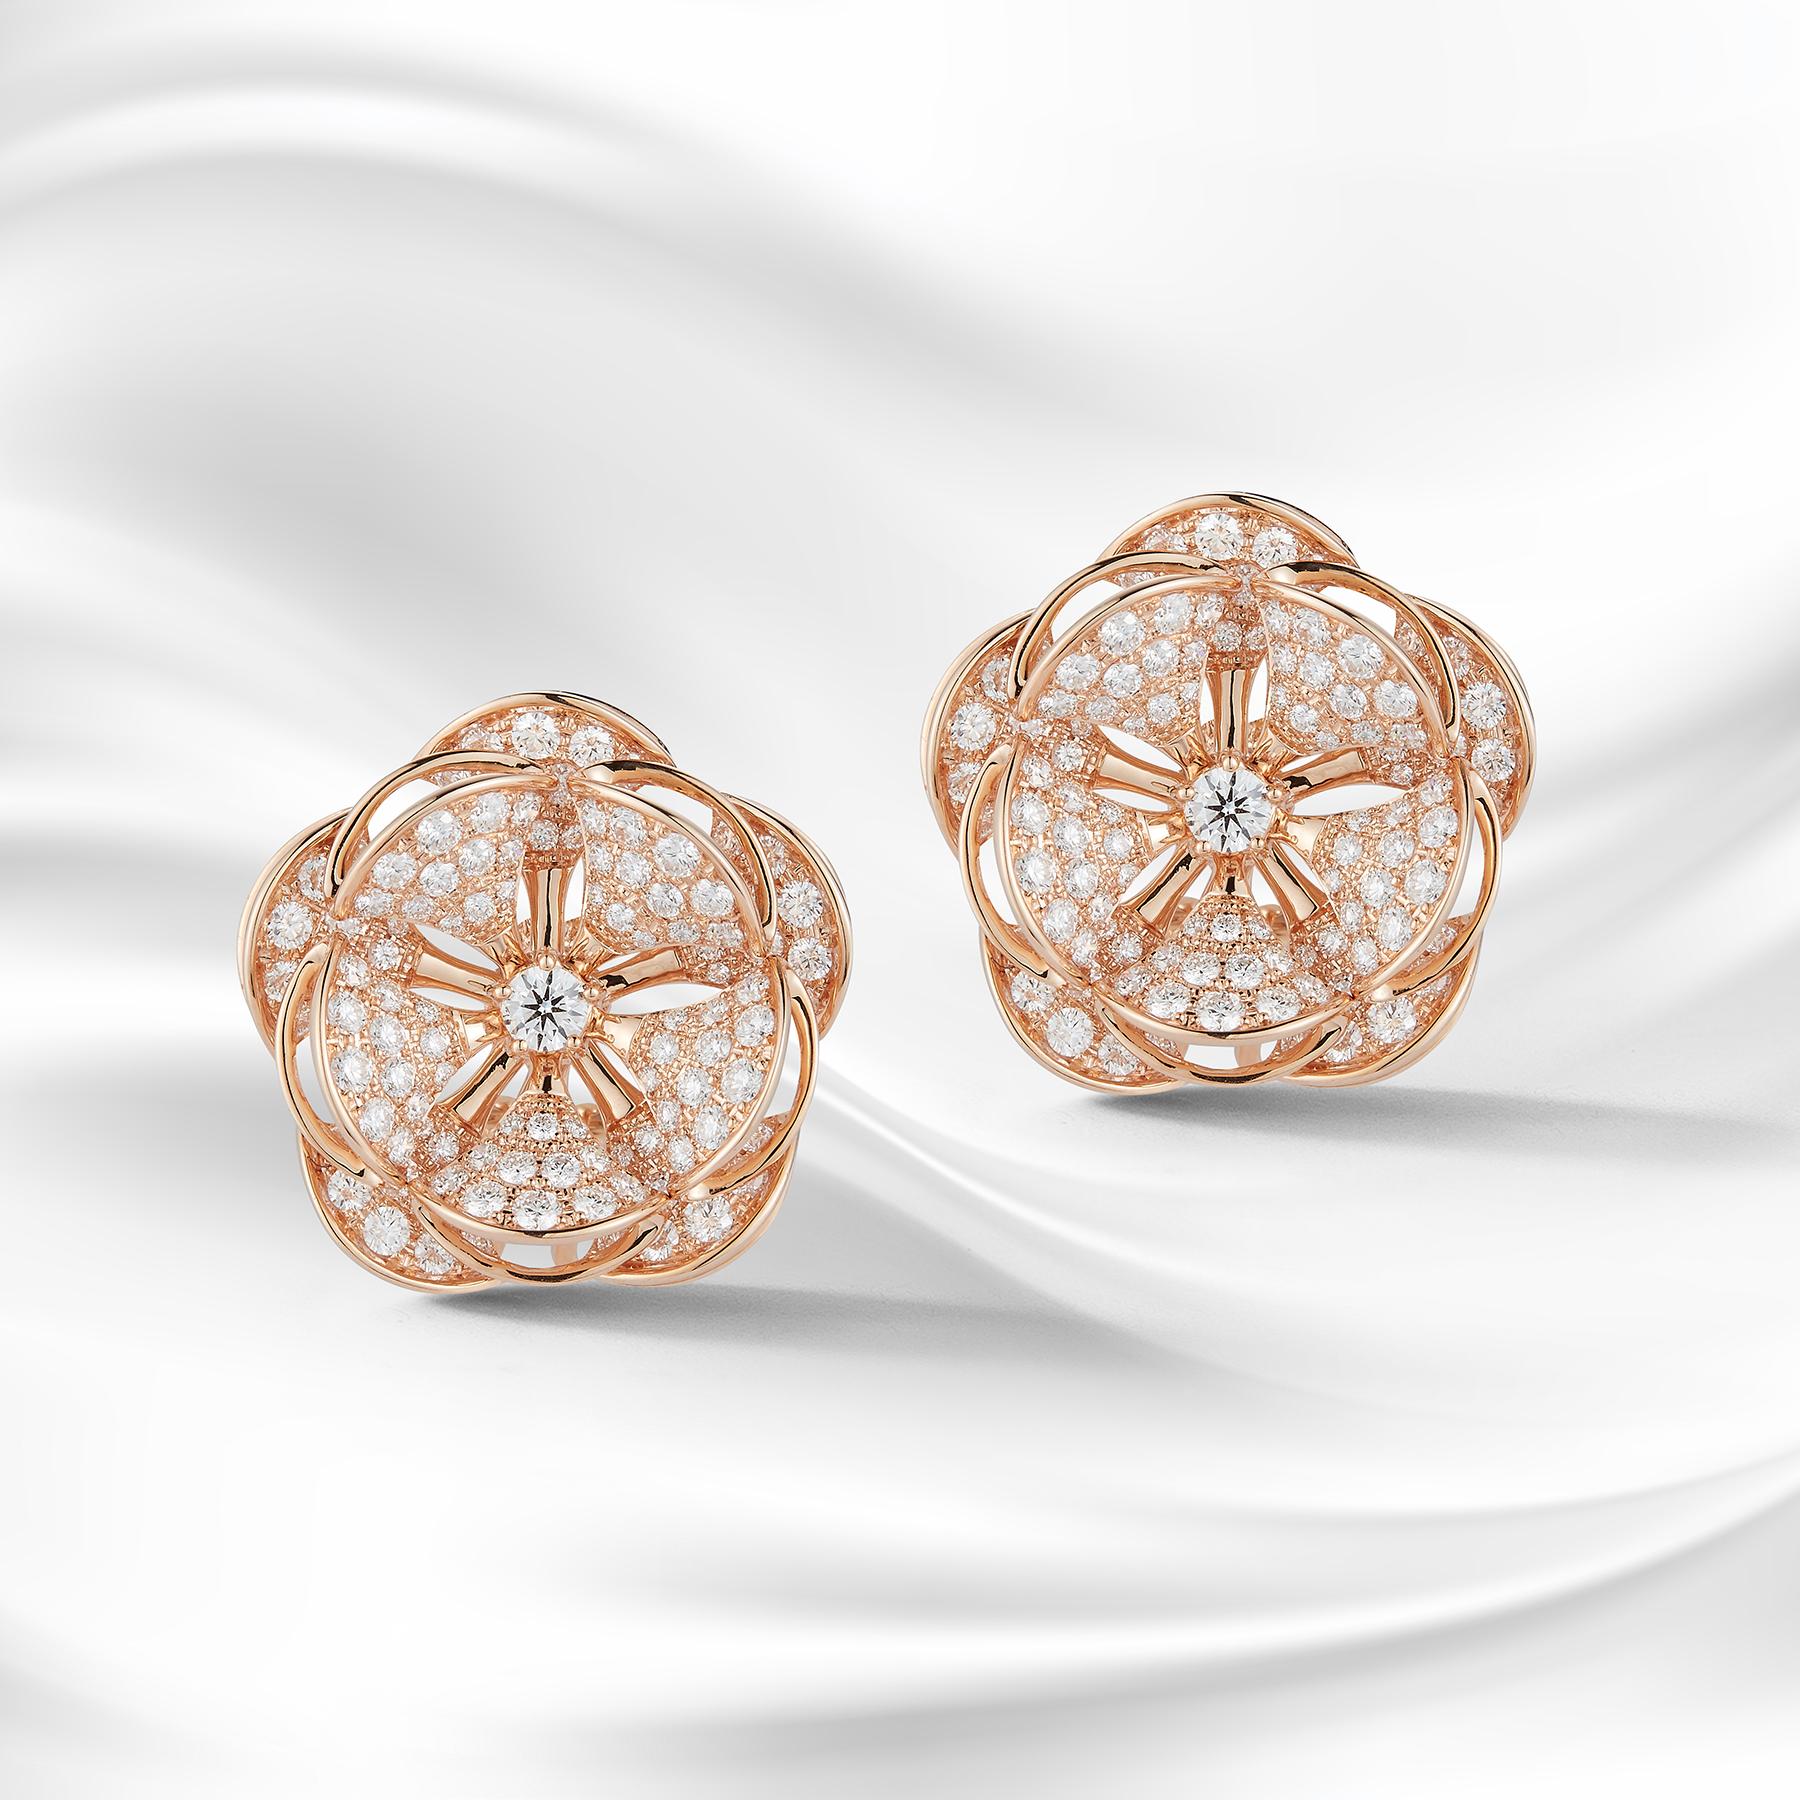 Modern Gorgeous 18 Karat Pink Gold Flower-Shaped Statement Earrings with 242 Diamonds For Sale